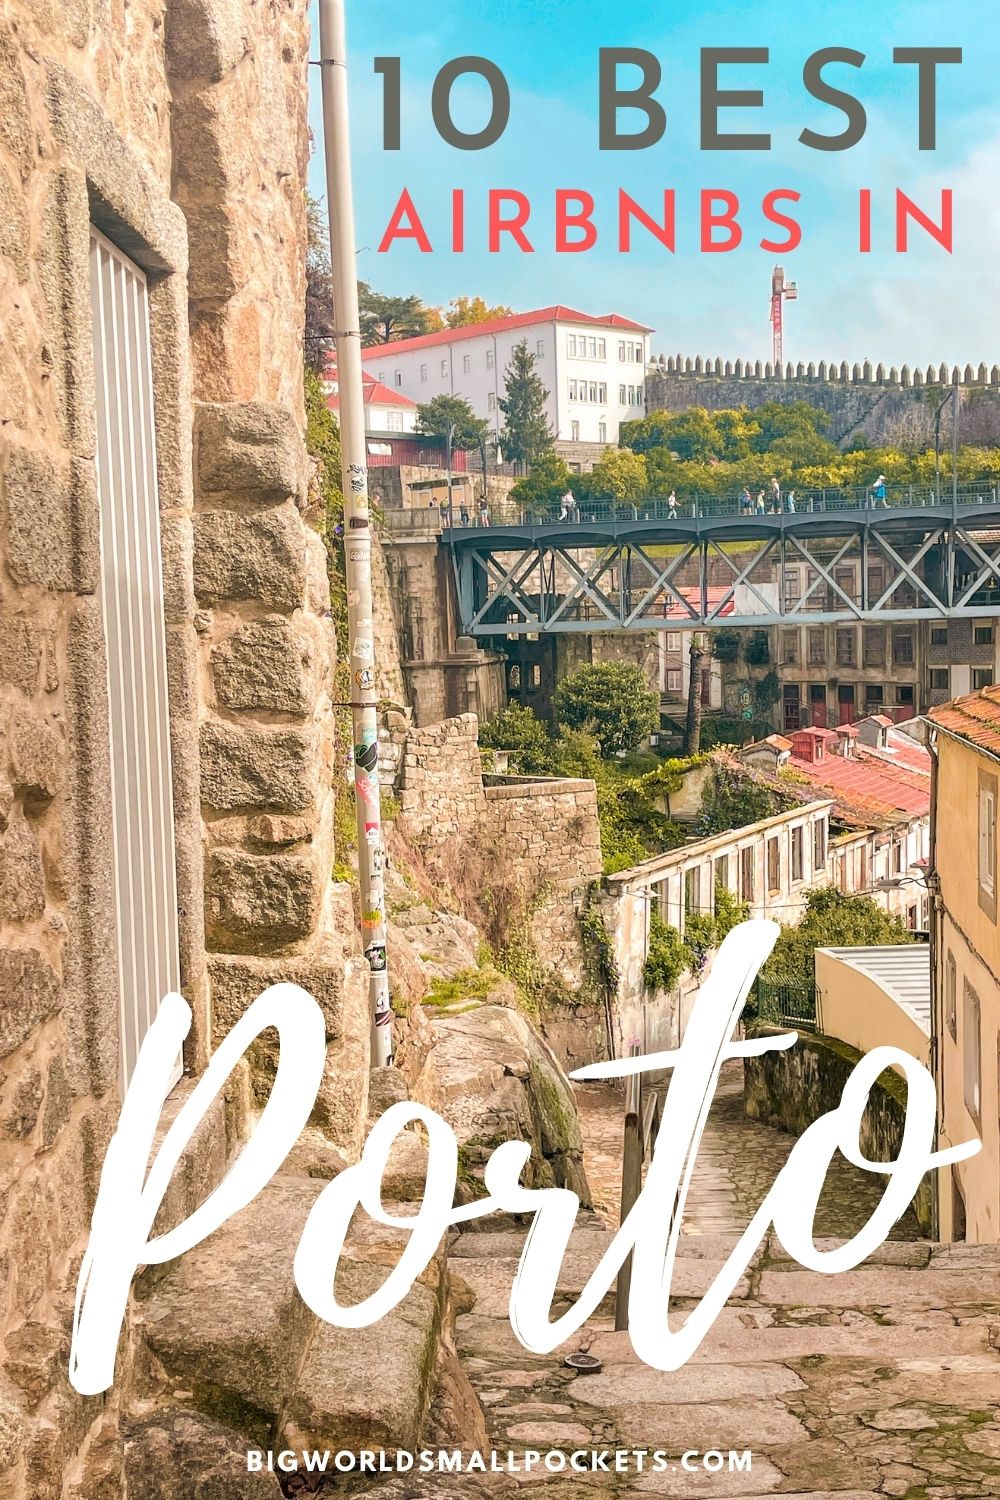 The 10 Best Airbnbs in Porto, Portugal